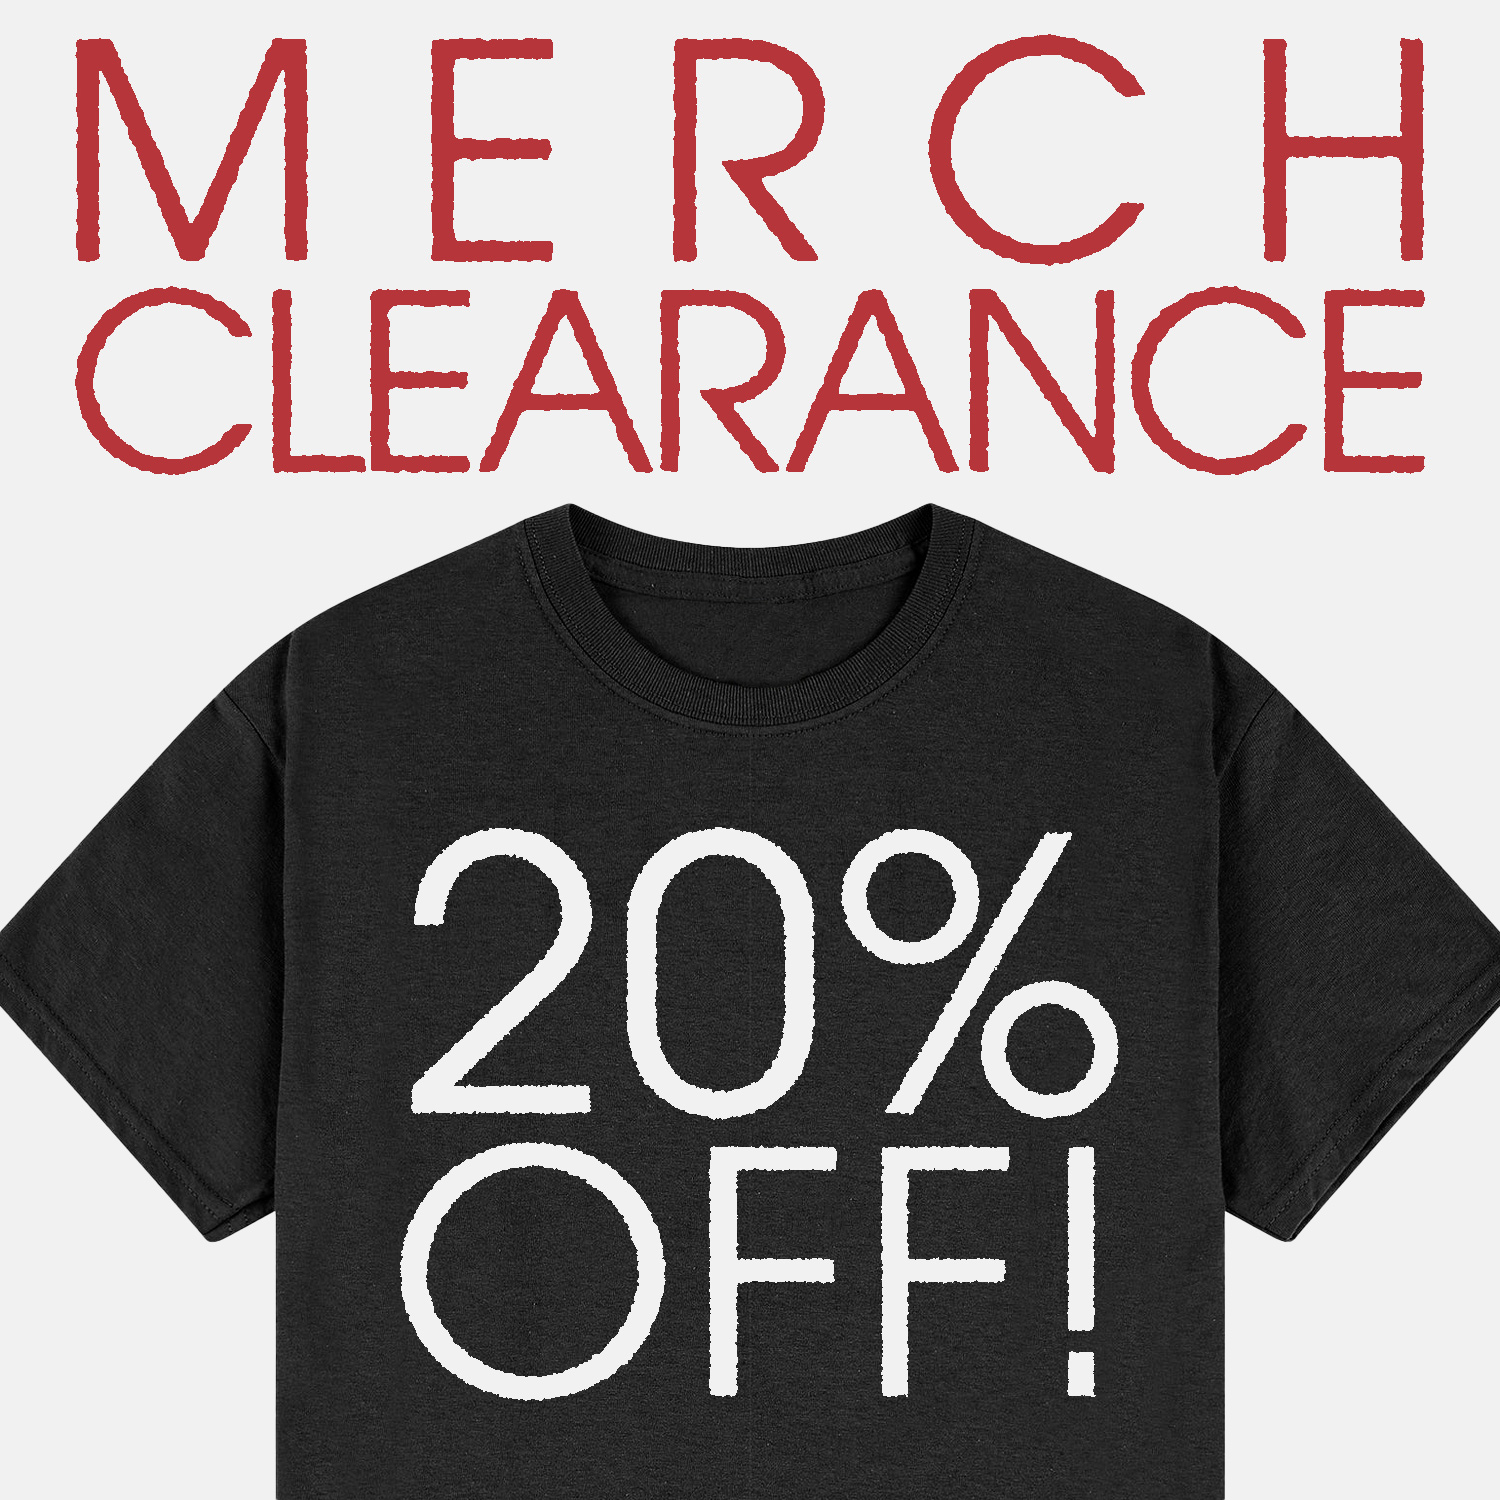 Merch and more 20% off!